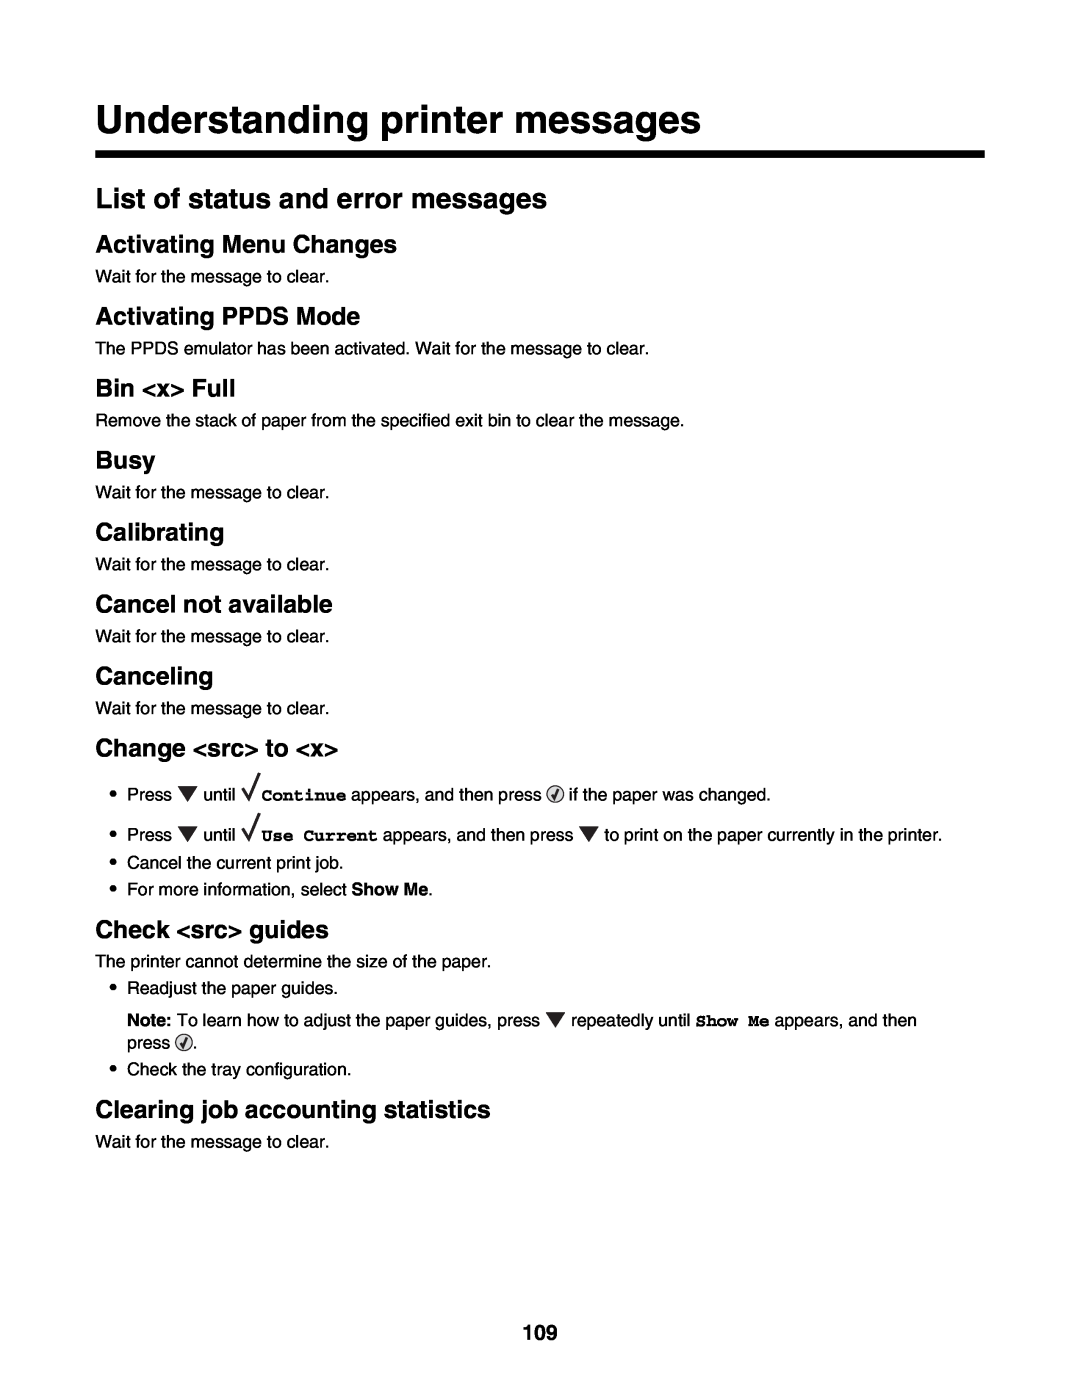 Lexmark C935 Understanding printer messages, List of status and error messages, Activating Menu Changes, Bin x Full, Busy 